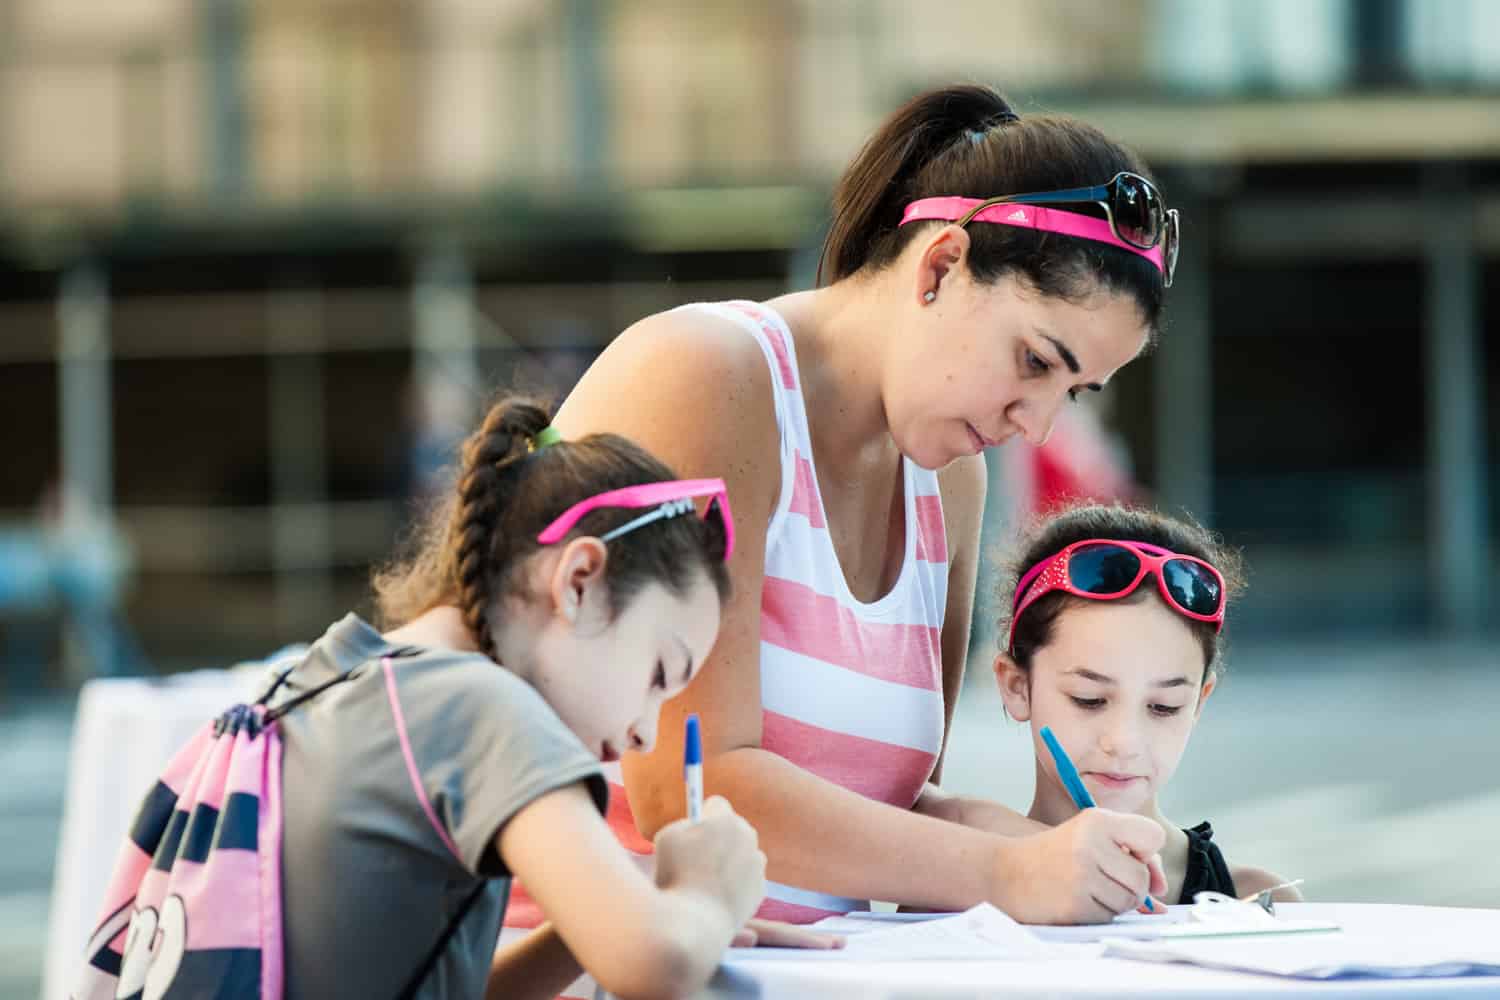 NYC Race for the Cure photos of woman and her two daughters filling out paperwork